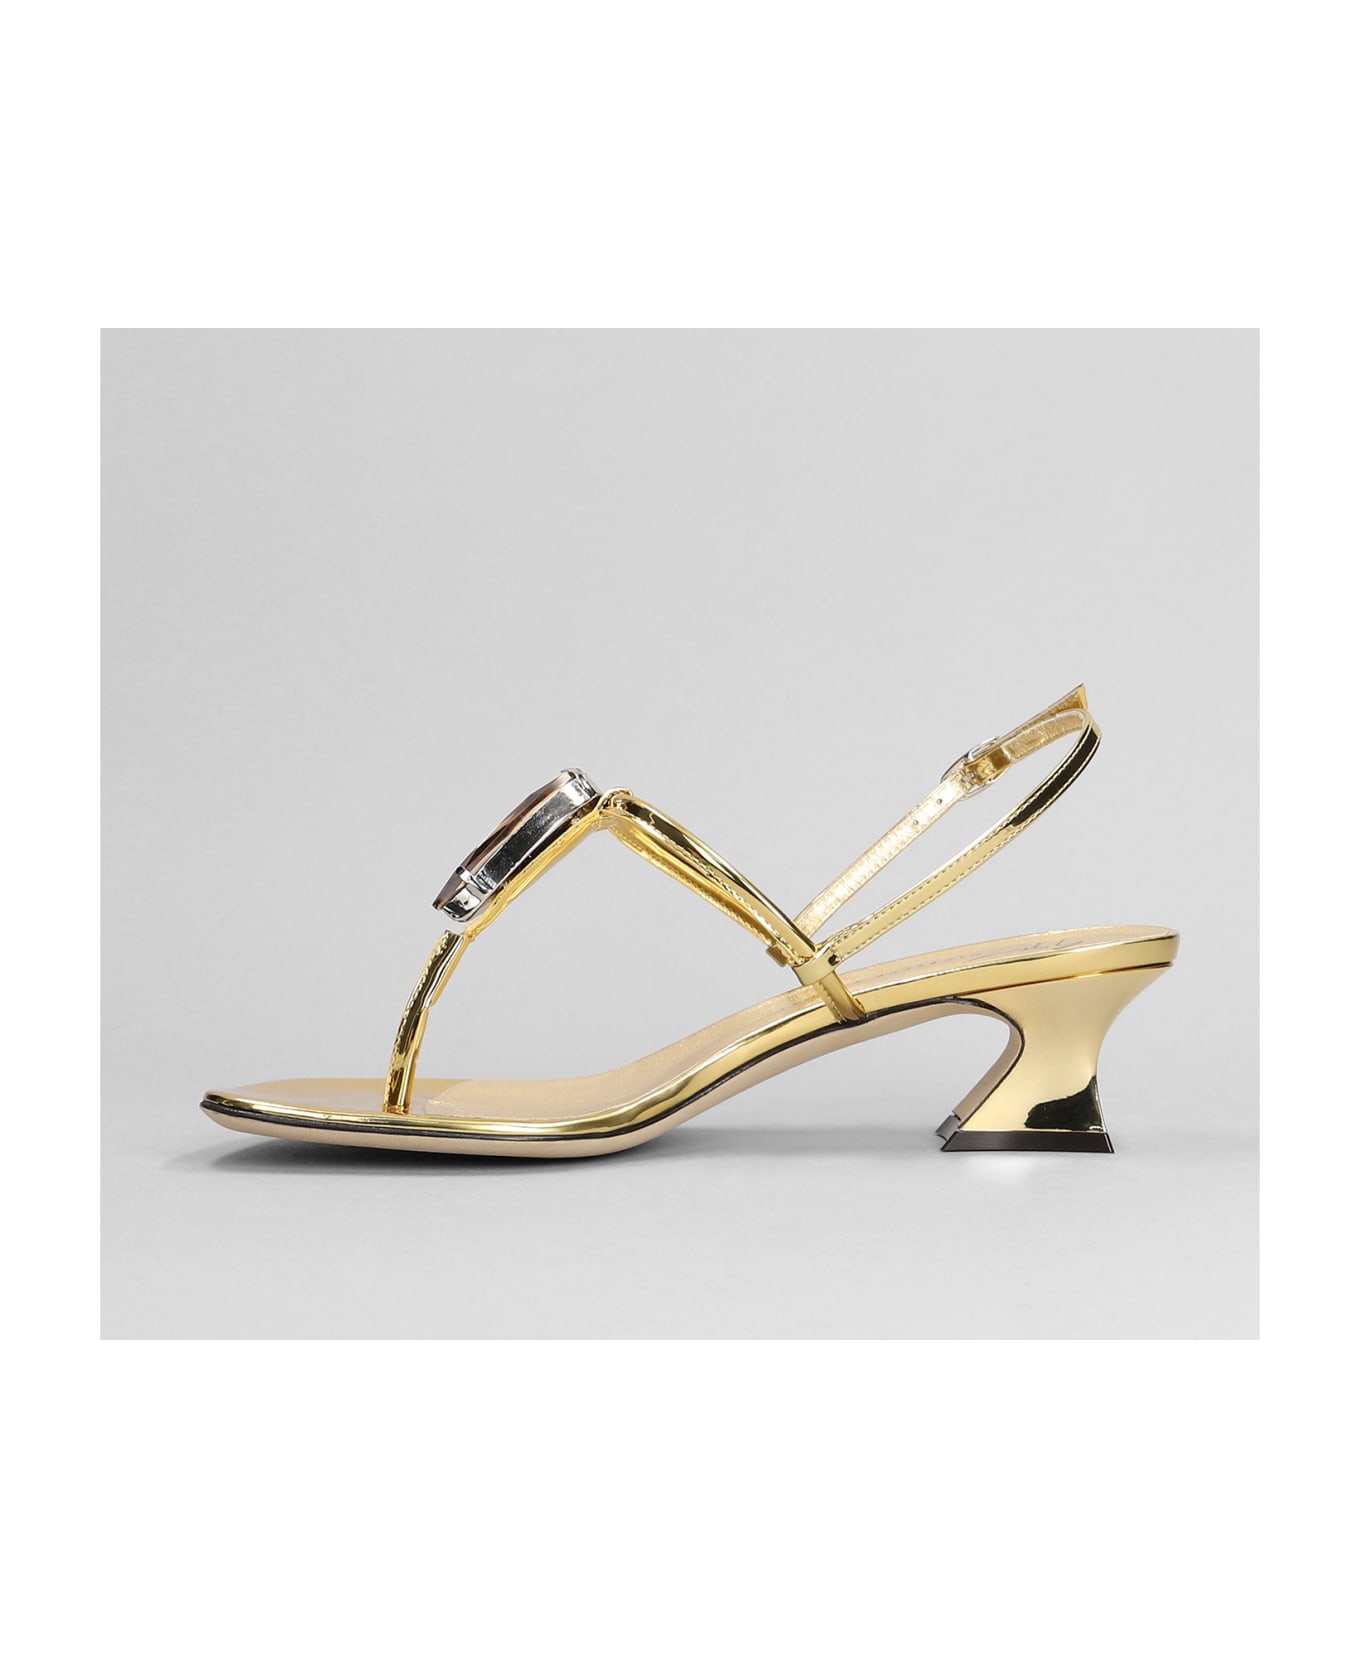 Giuseppe Zanotti Anthonia Sandals In Gold Synthetic Leather - gold